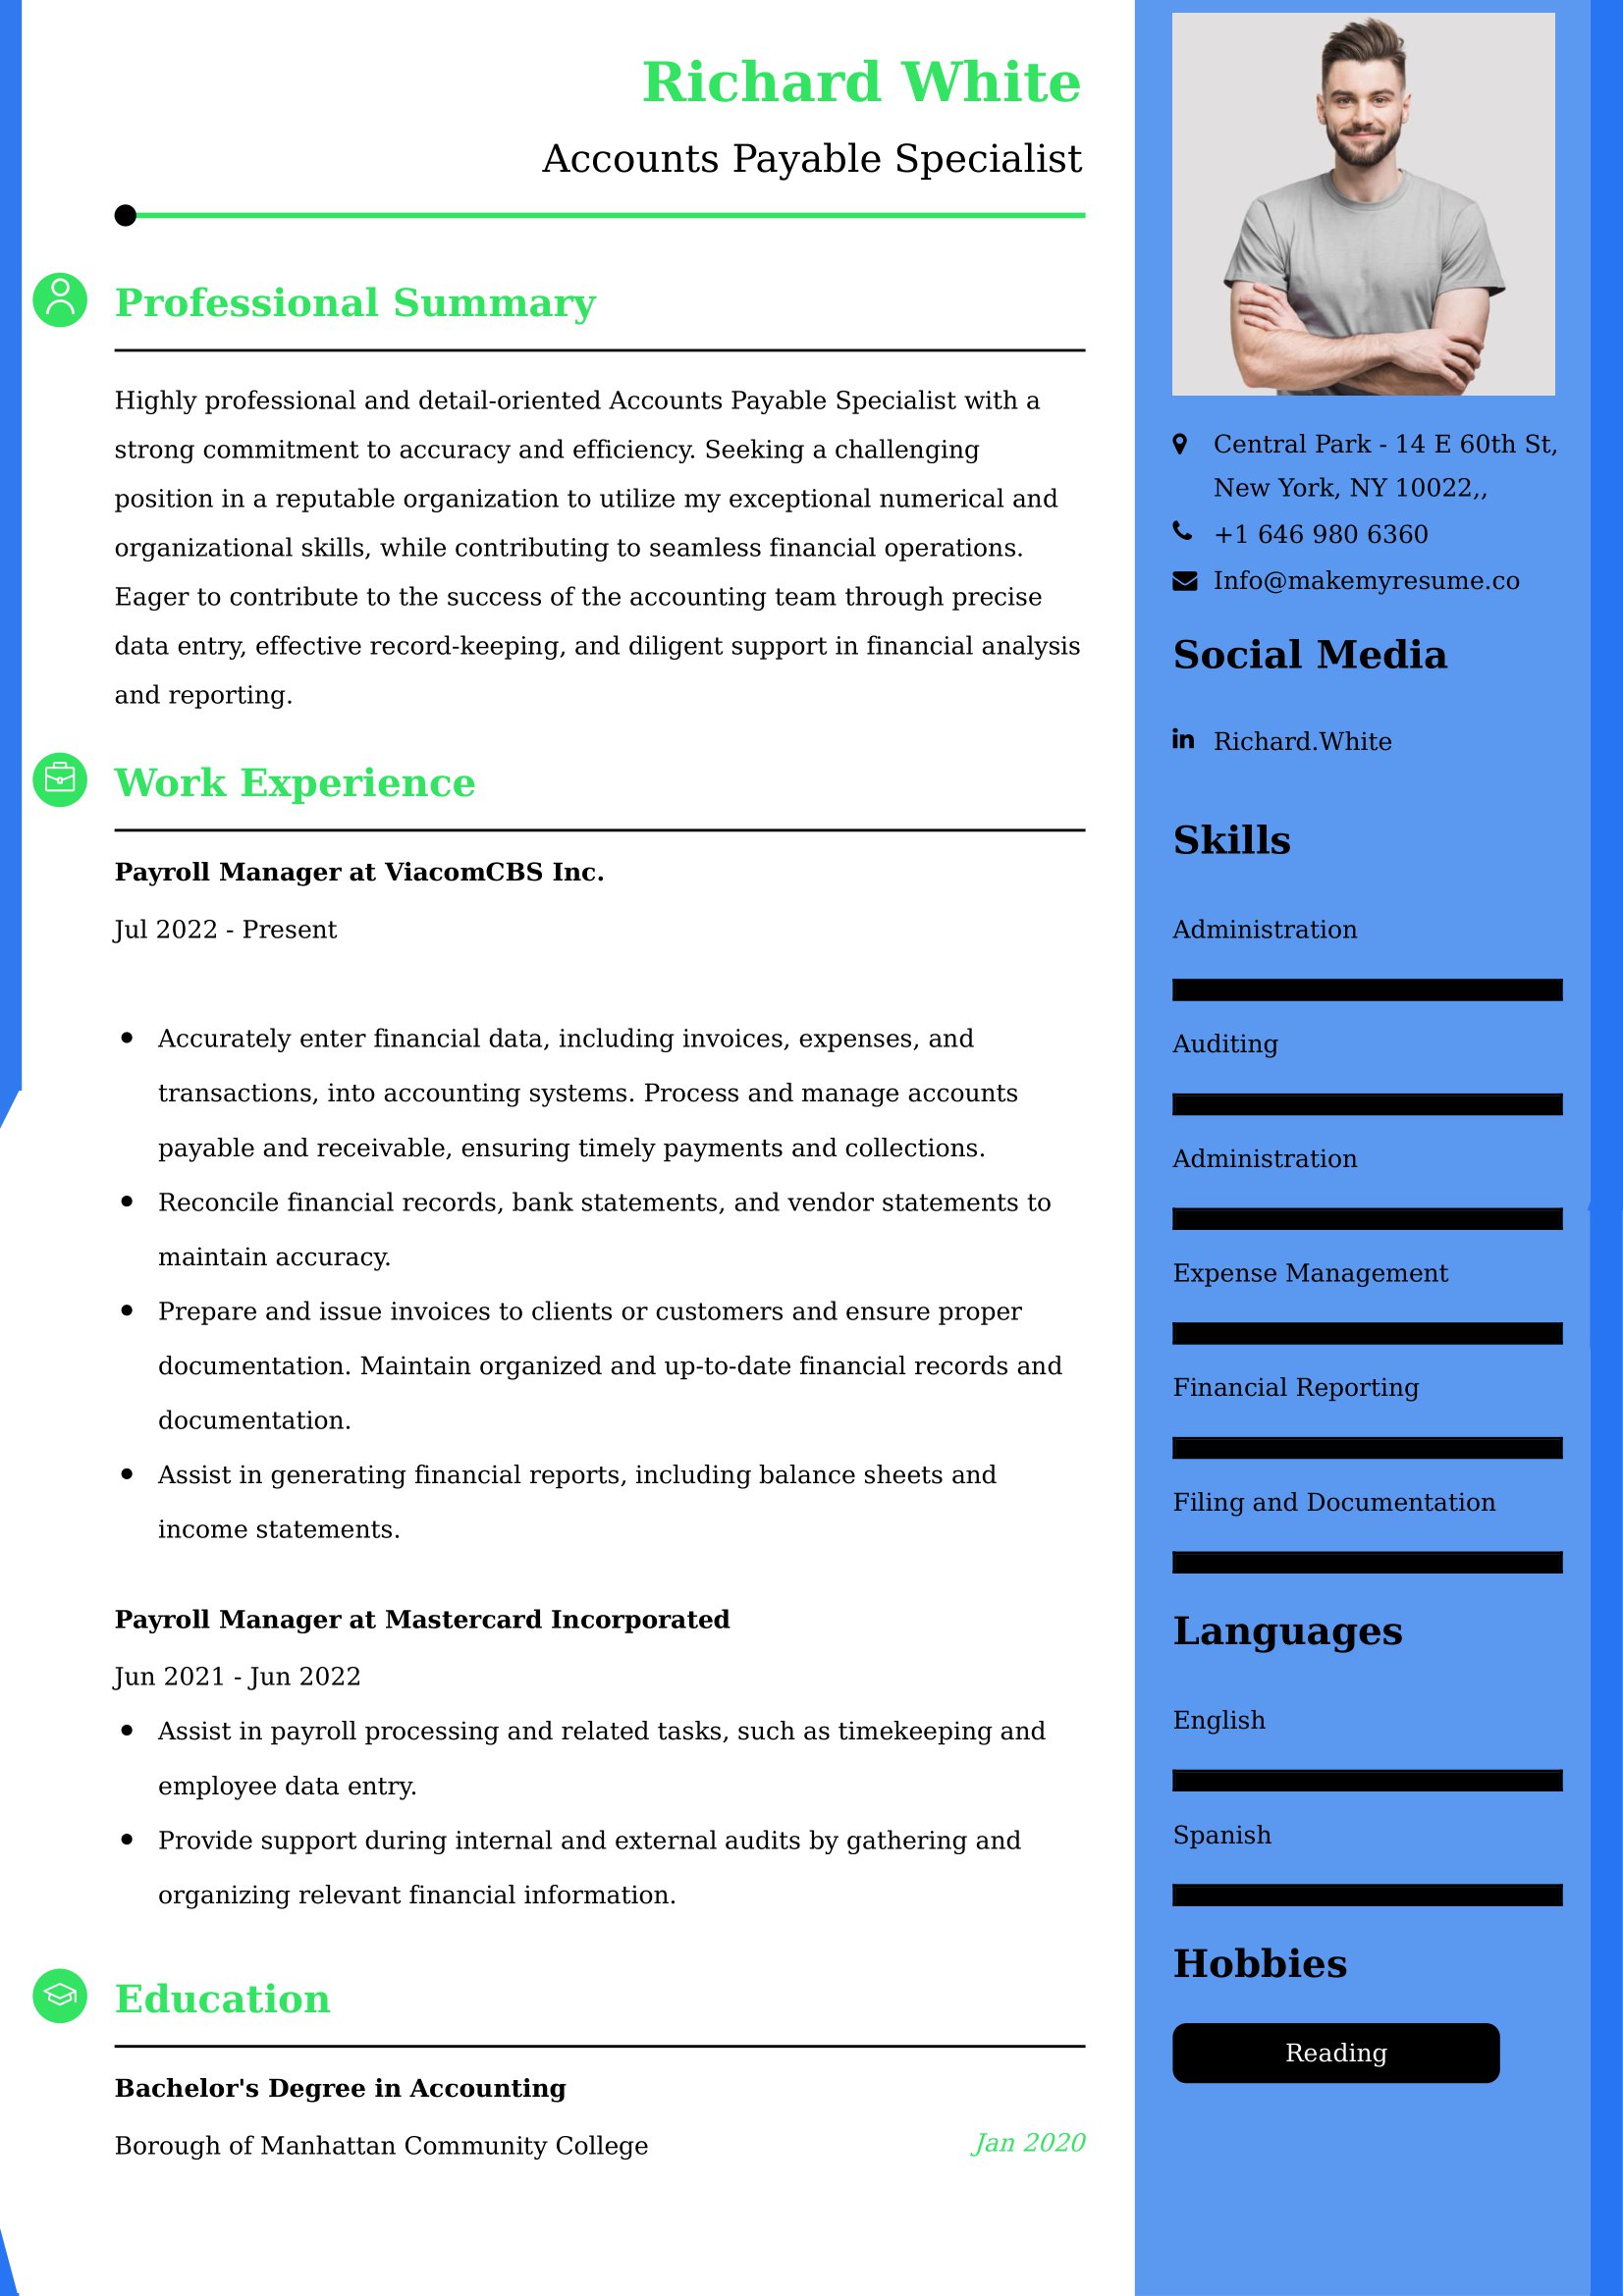 Accounts Payable Specialist Resume Examples - UK Format, Latest Template.